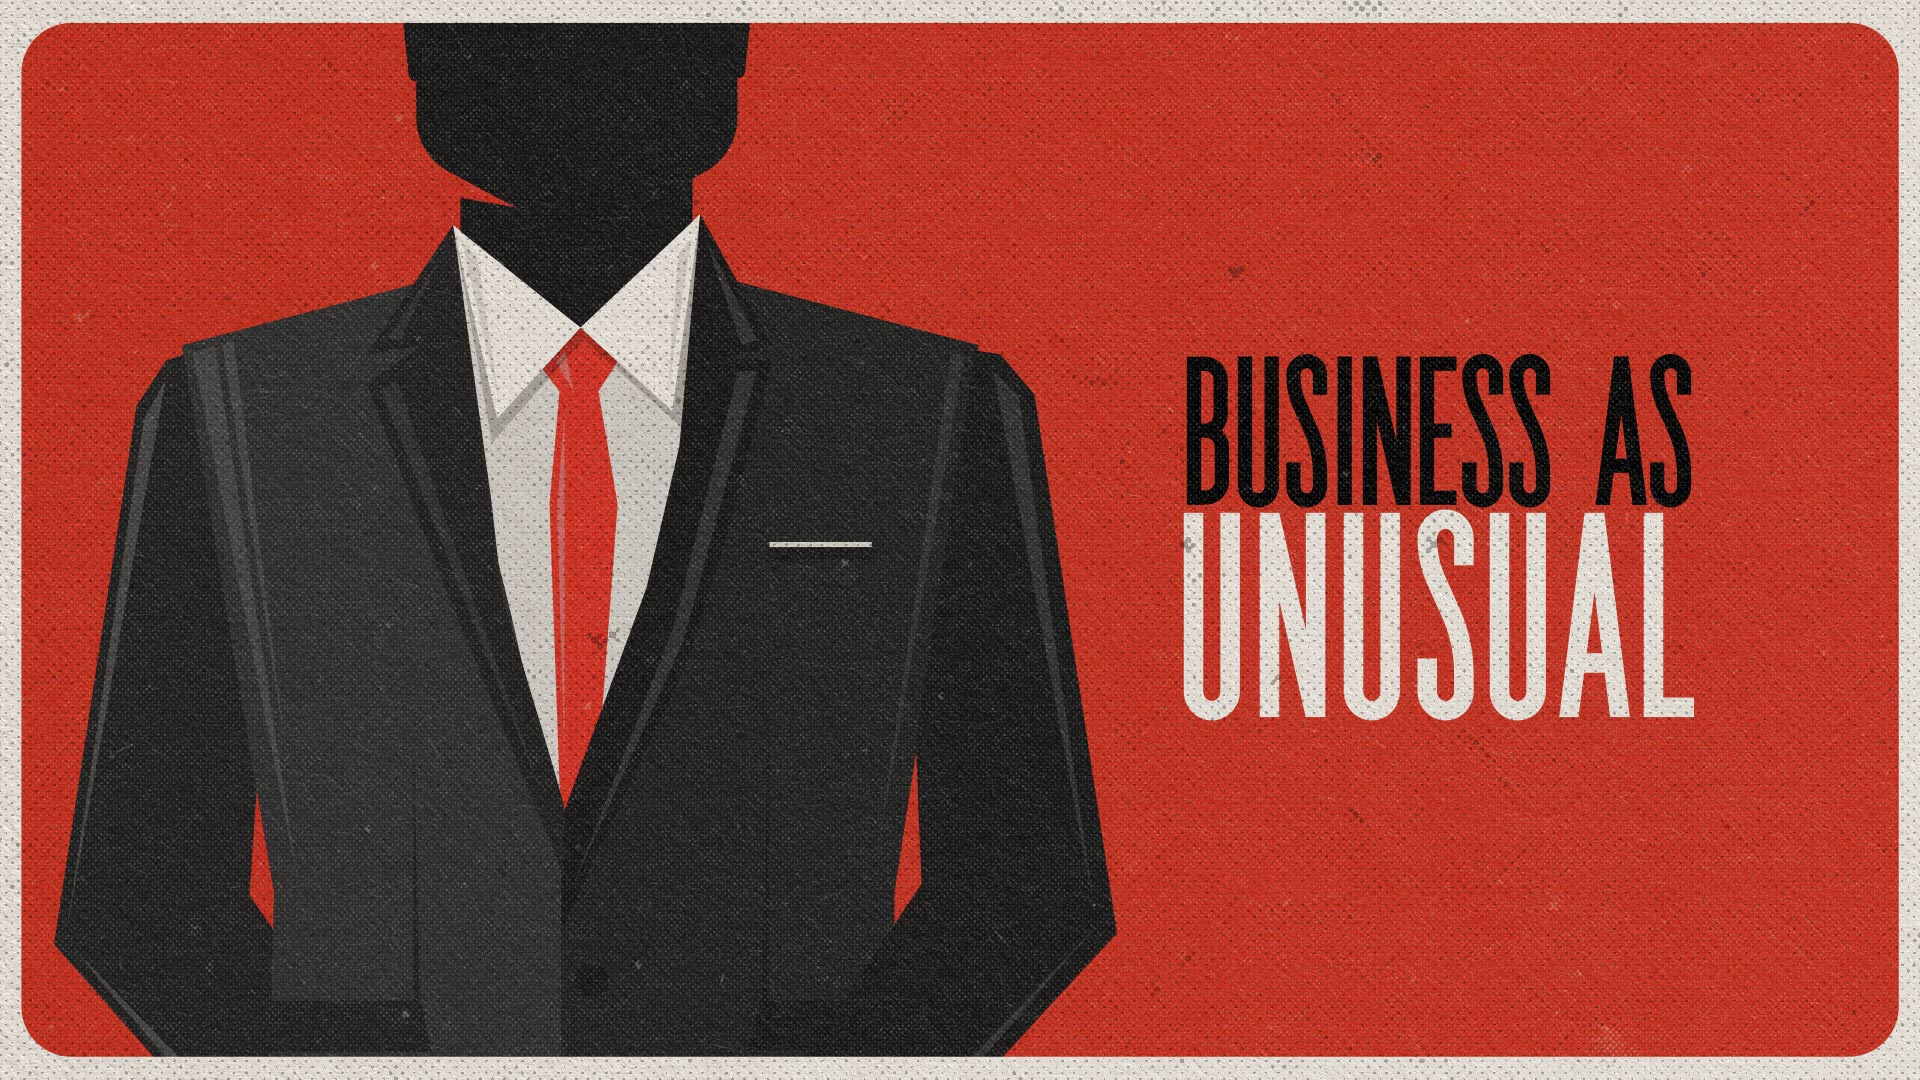    Business as unusual